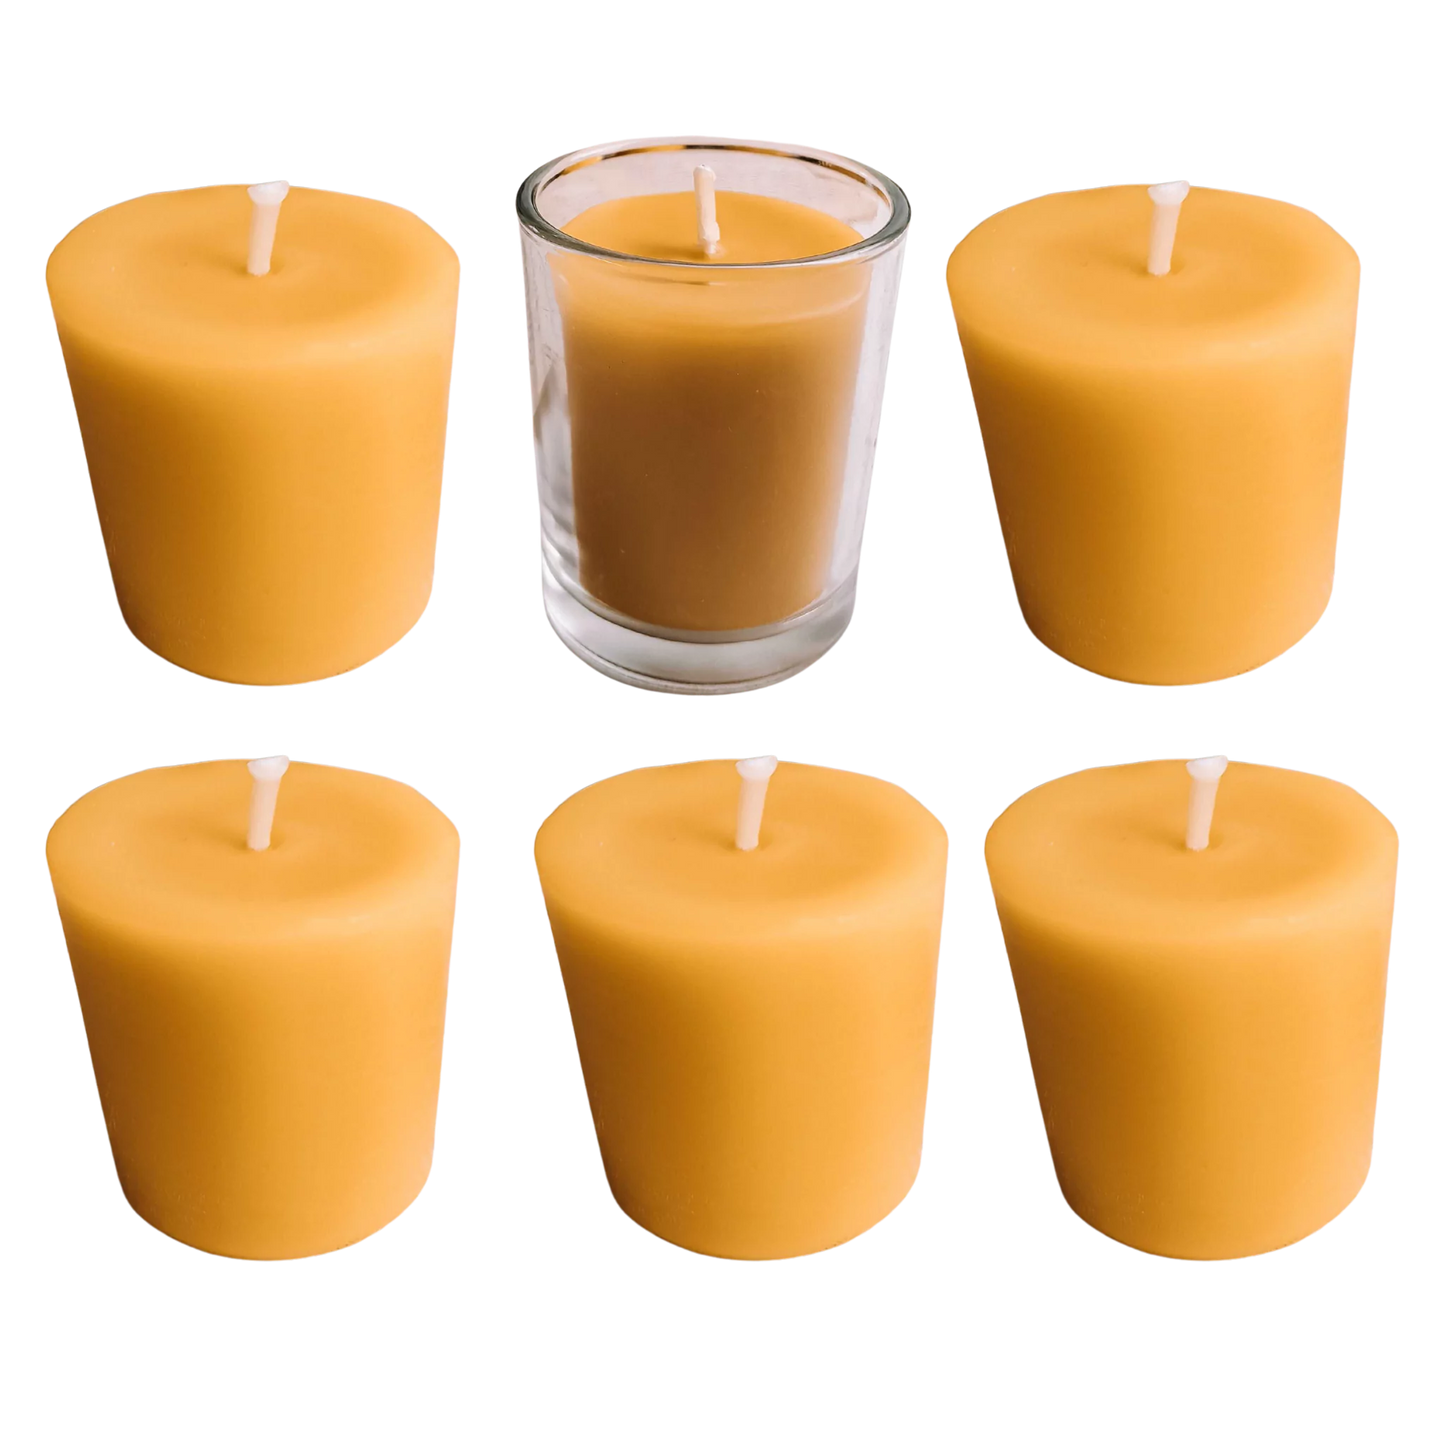 Elegant beeswax votive candles designed for a pure burn without soot, enhancing your home's comfort and atmosphere